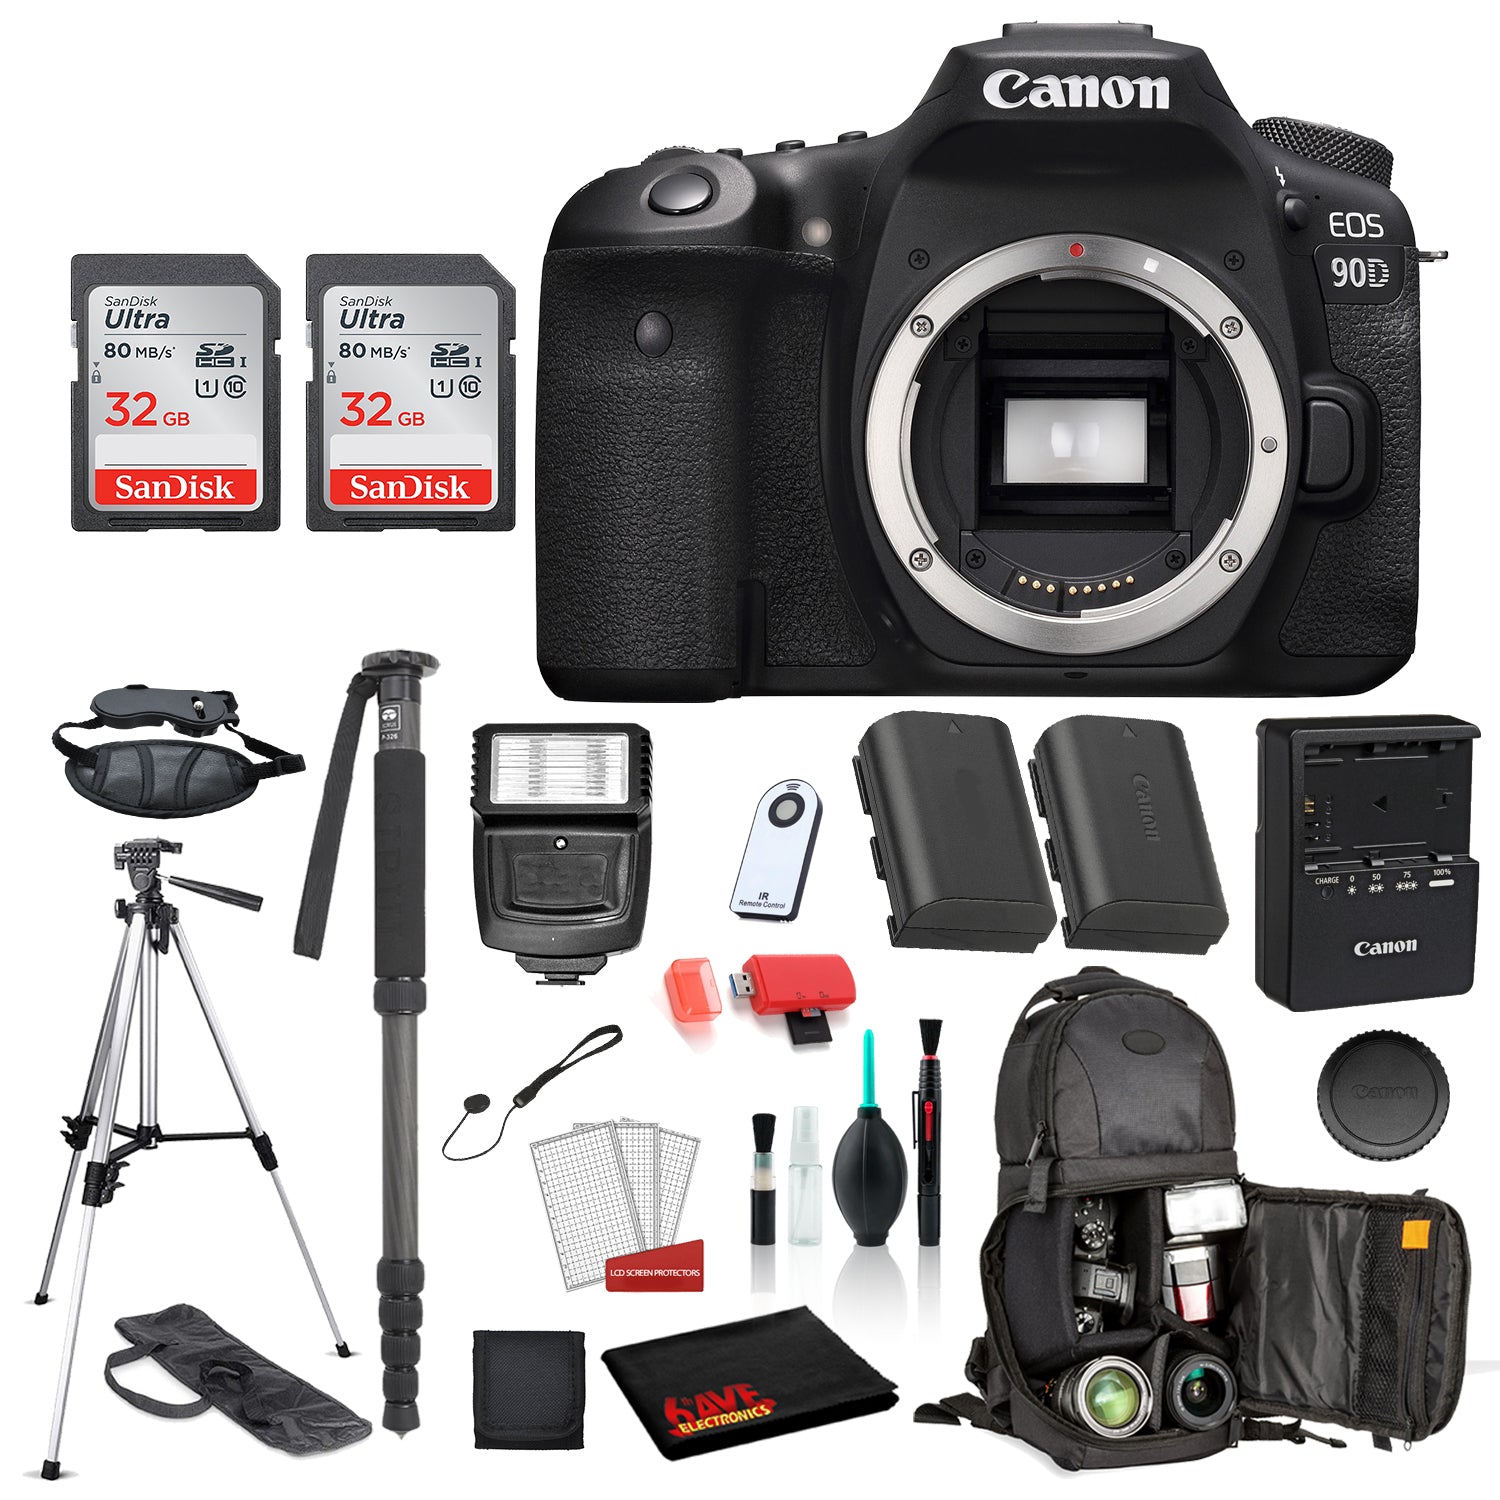 Canon EOS 90D Digital SLR Camera Body Only Bundle: SanDisk 32GB SD Card (2CT) +  Battery for LPE6 + 72? Tripod + MORE